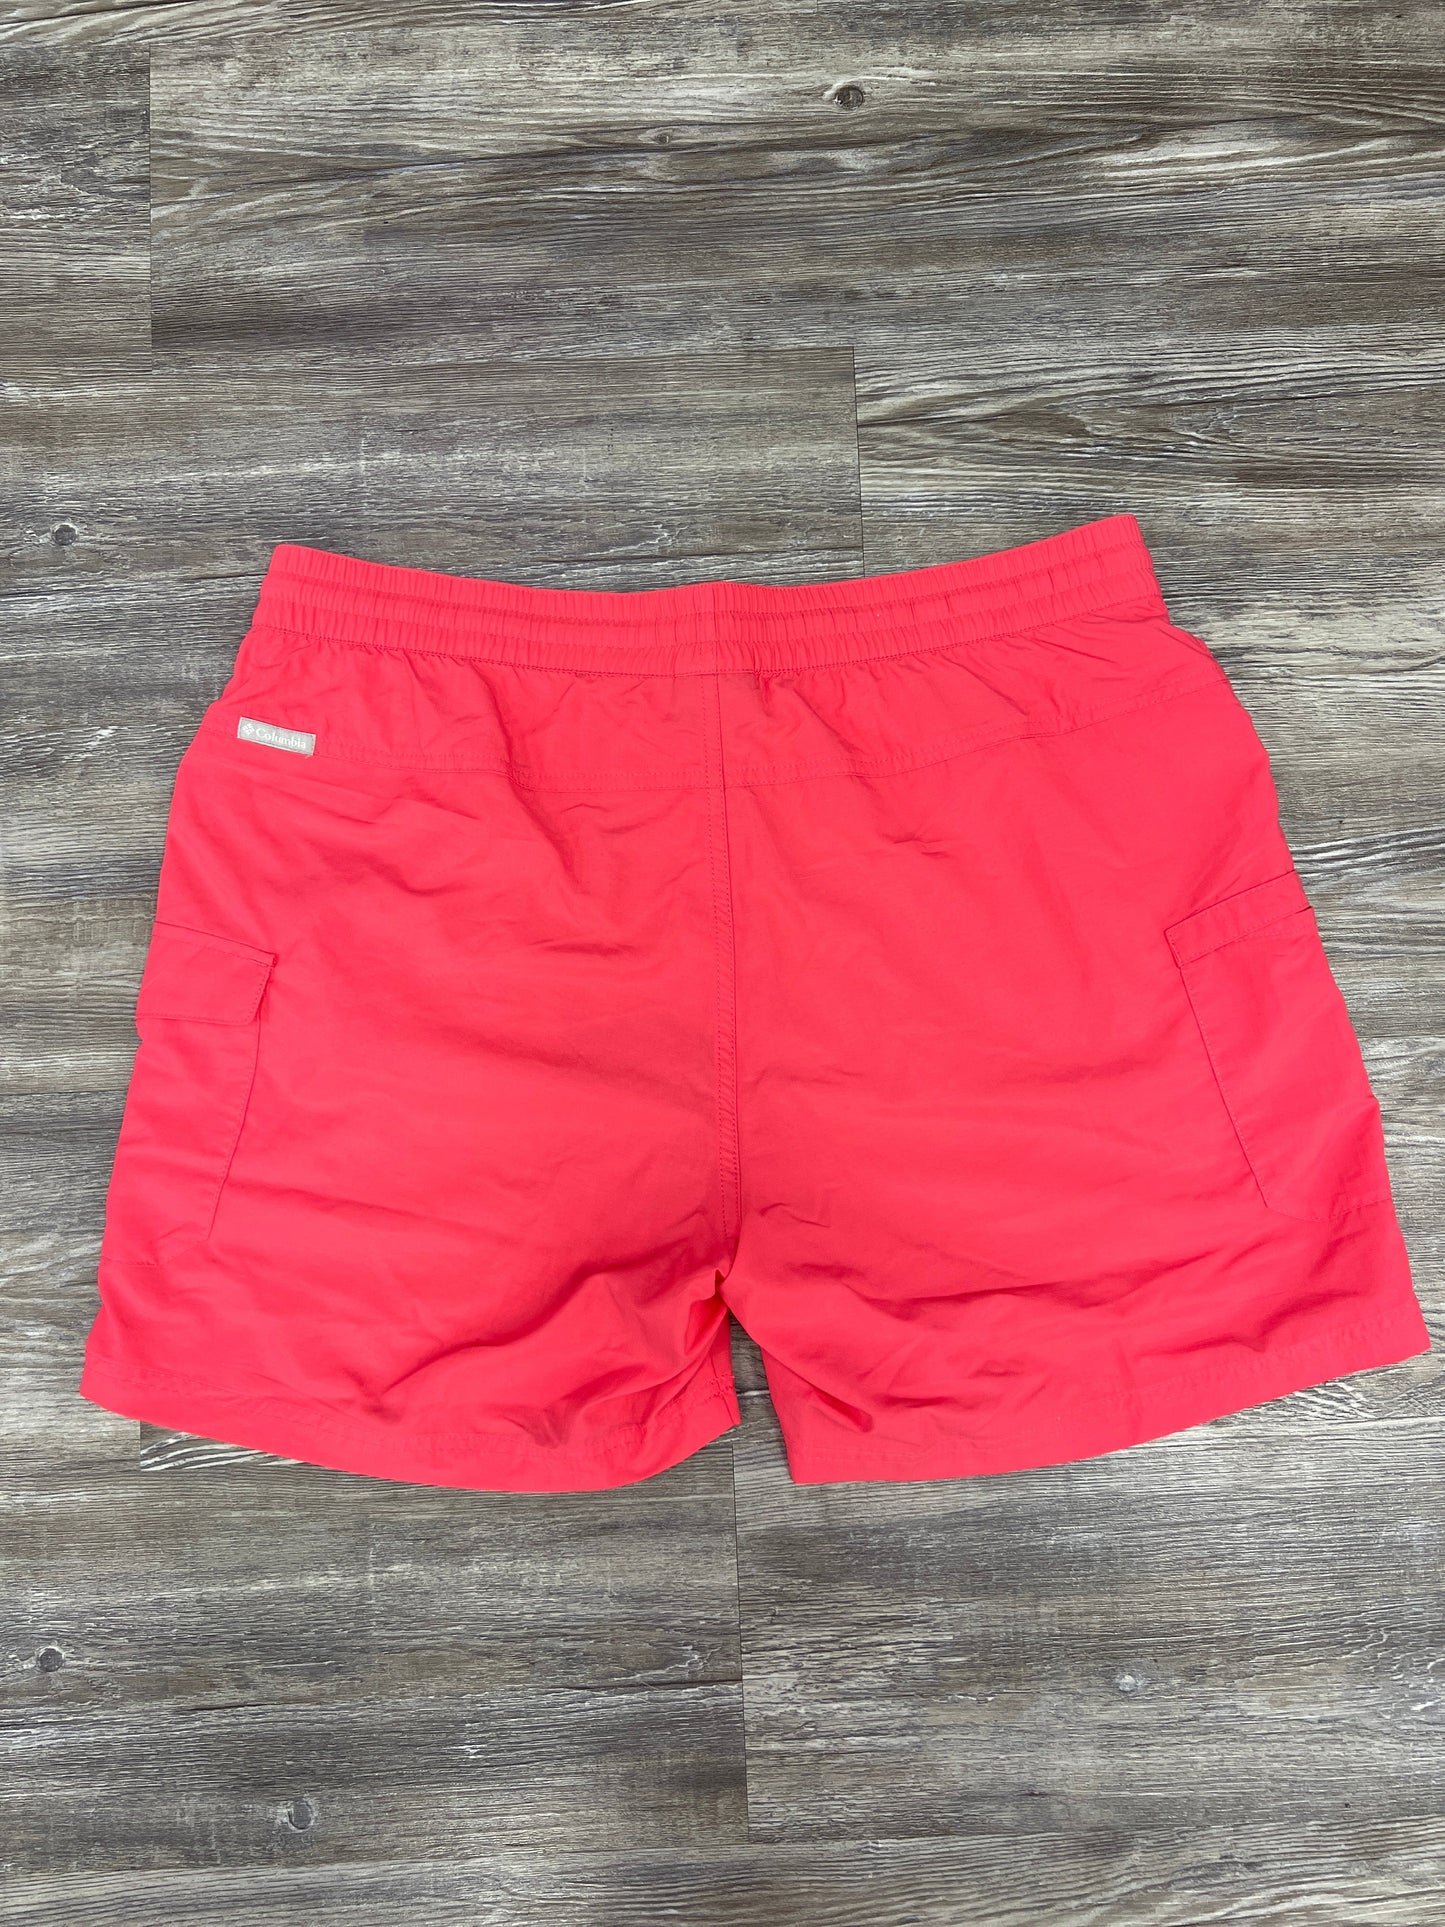 Pink Shorts Columbia, Size L